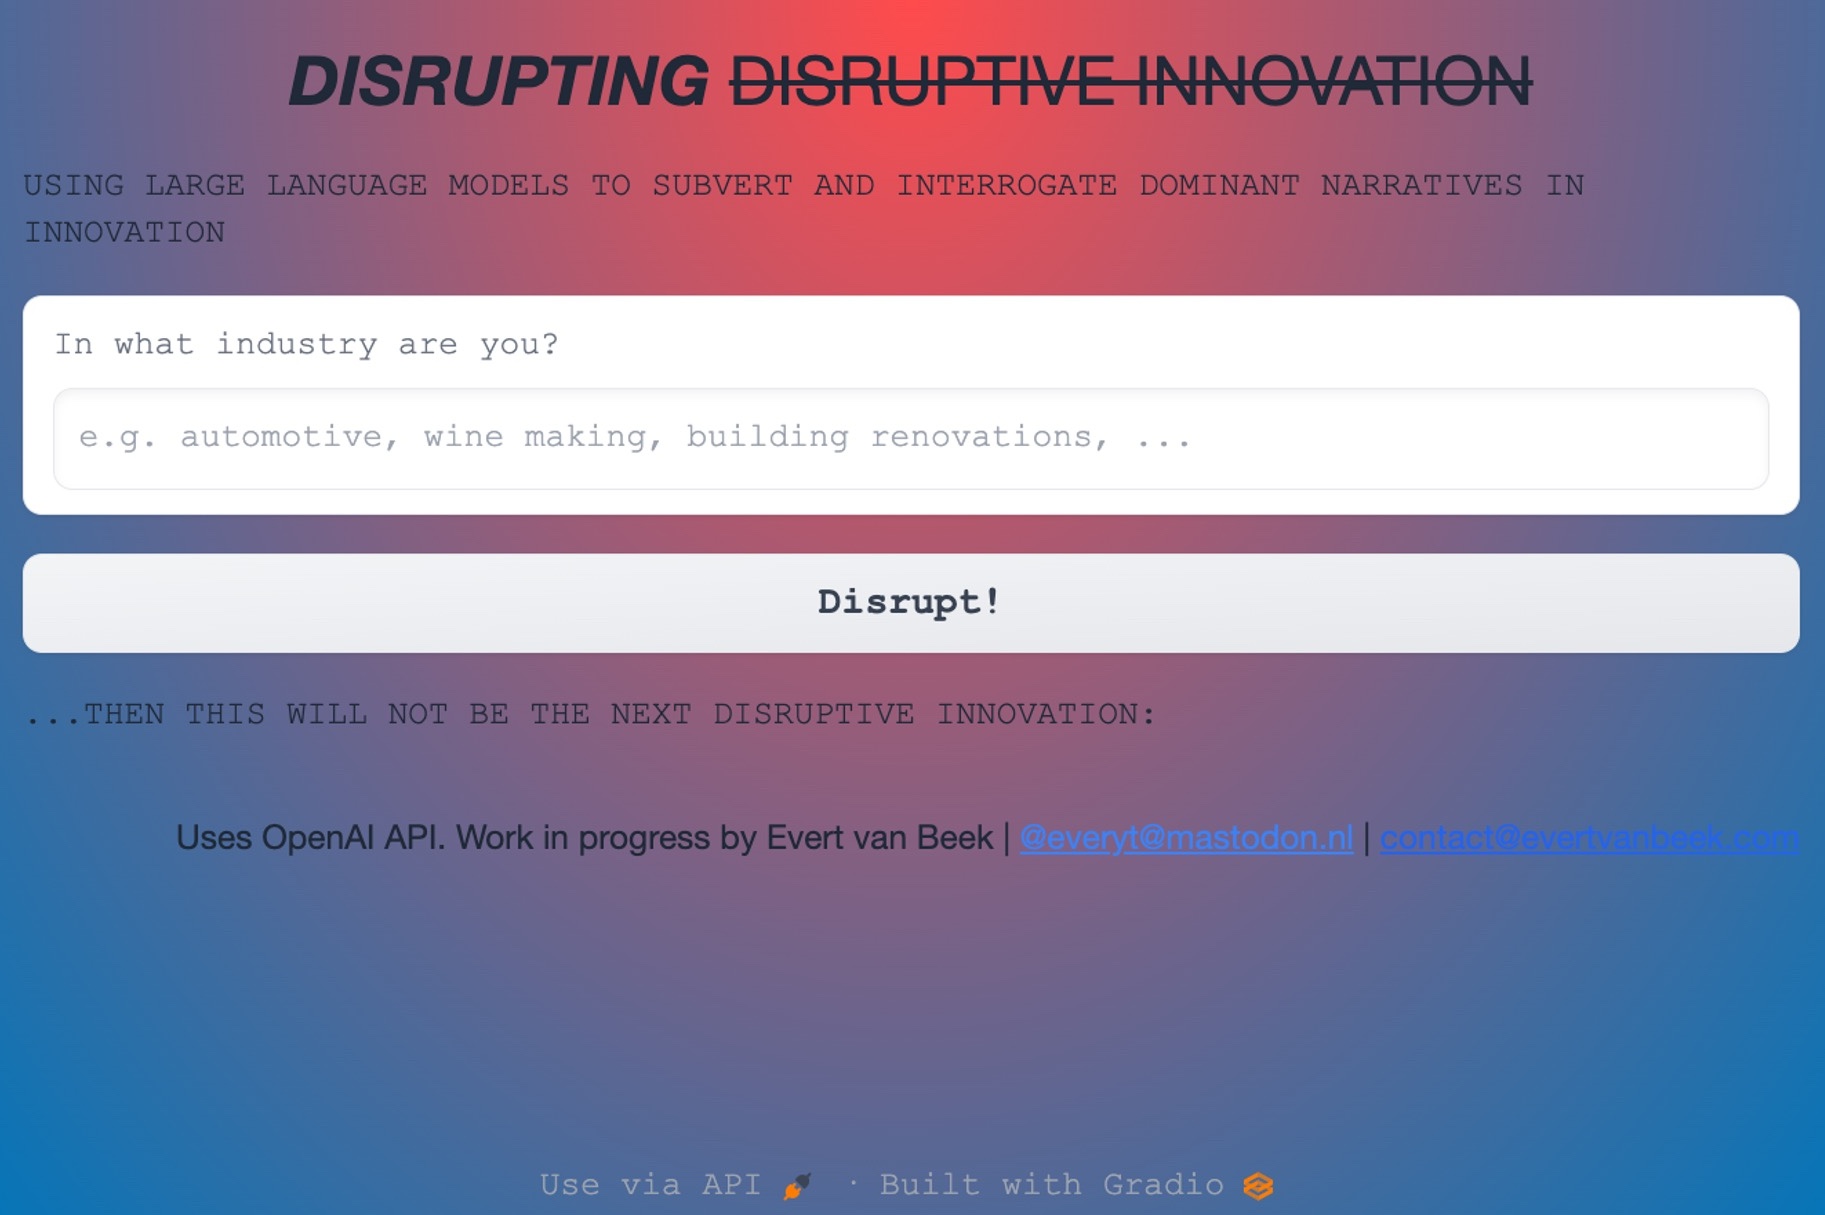 Disrupting Disruptive Innovation with / in Large Language Models